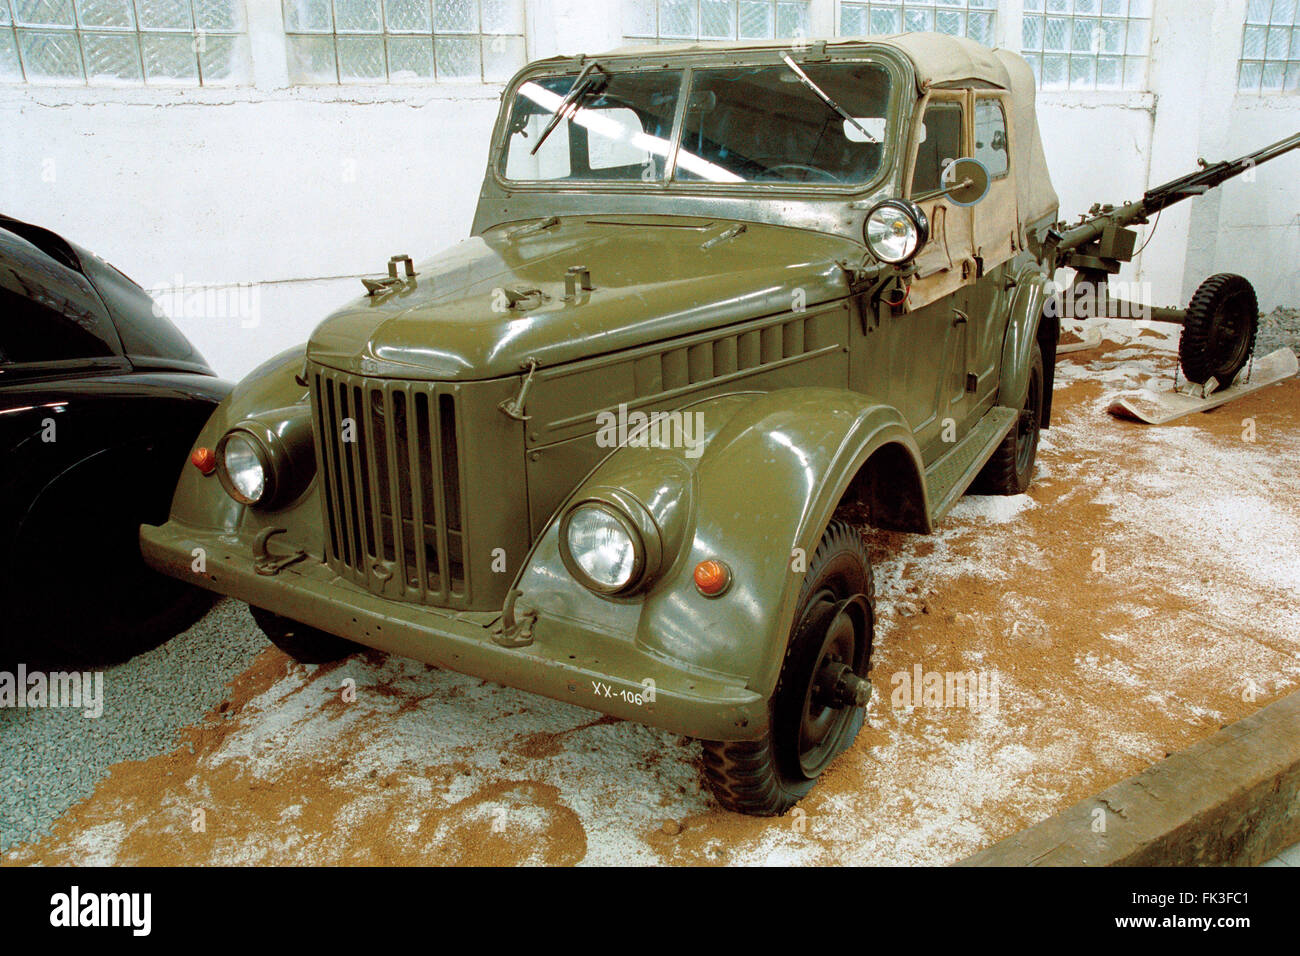 Soviet military off-road vehicle UAZ-469 produced the Ulyanovsk Automobile Plant in the 1970s displayed in the Military Technical Museum in Lesany, Czech Republic. Stock Photo